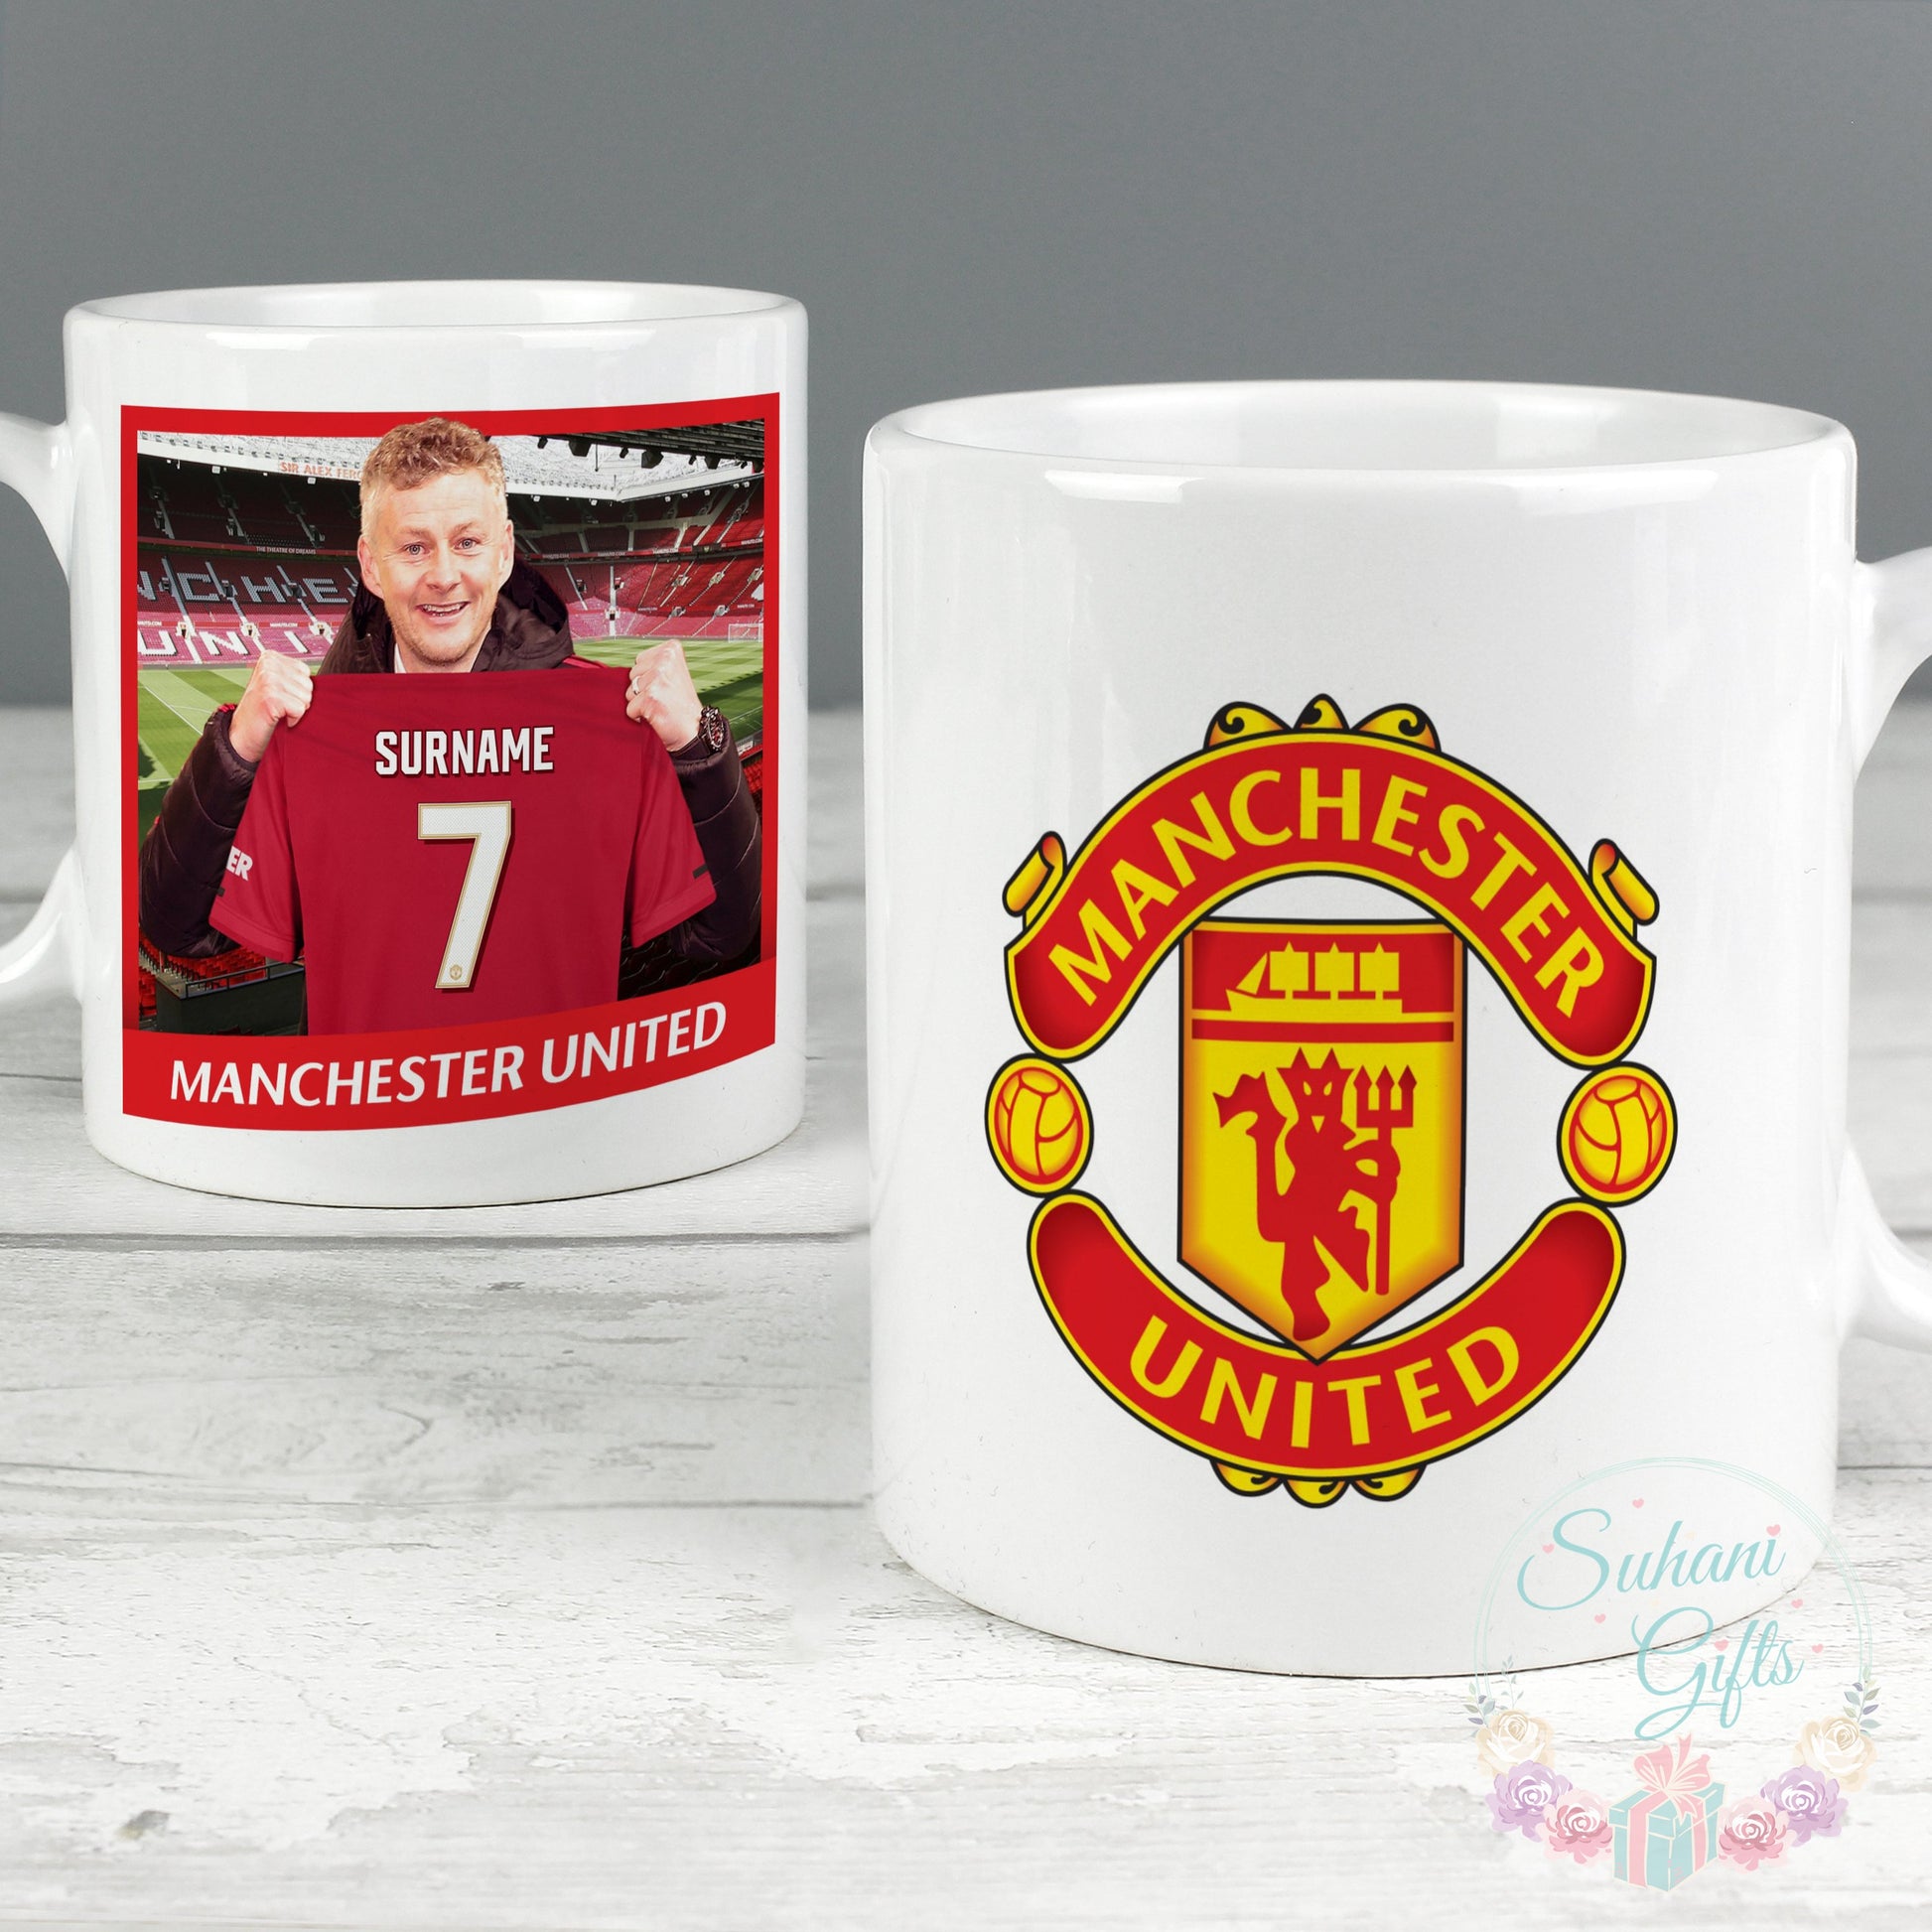 Personalised This Is An Awesome Manager Mug